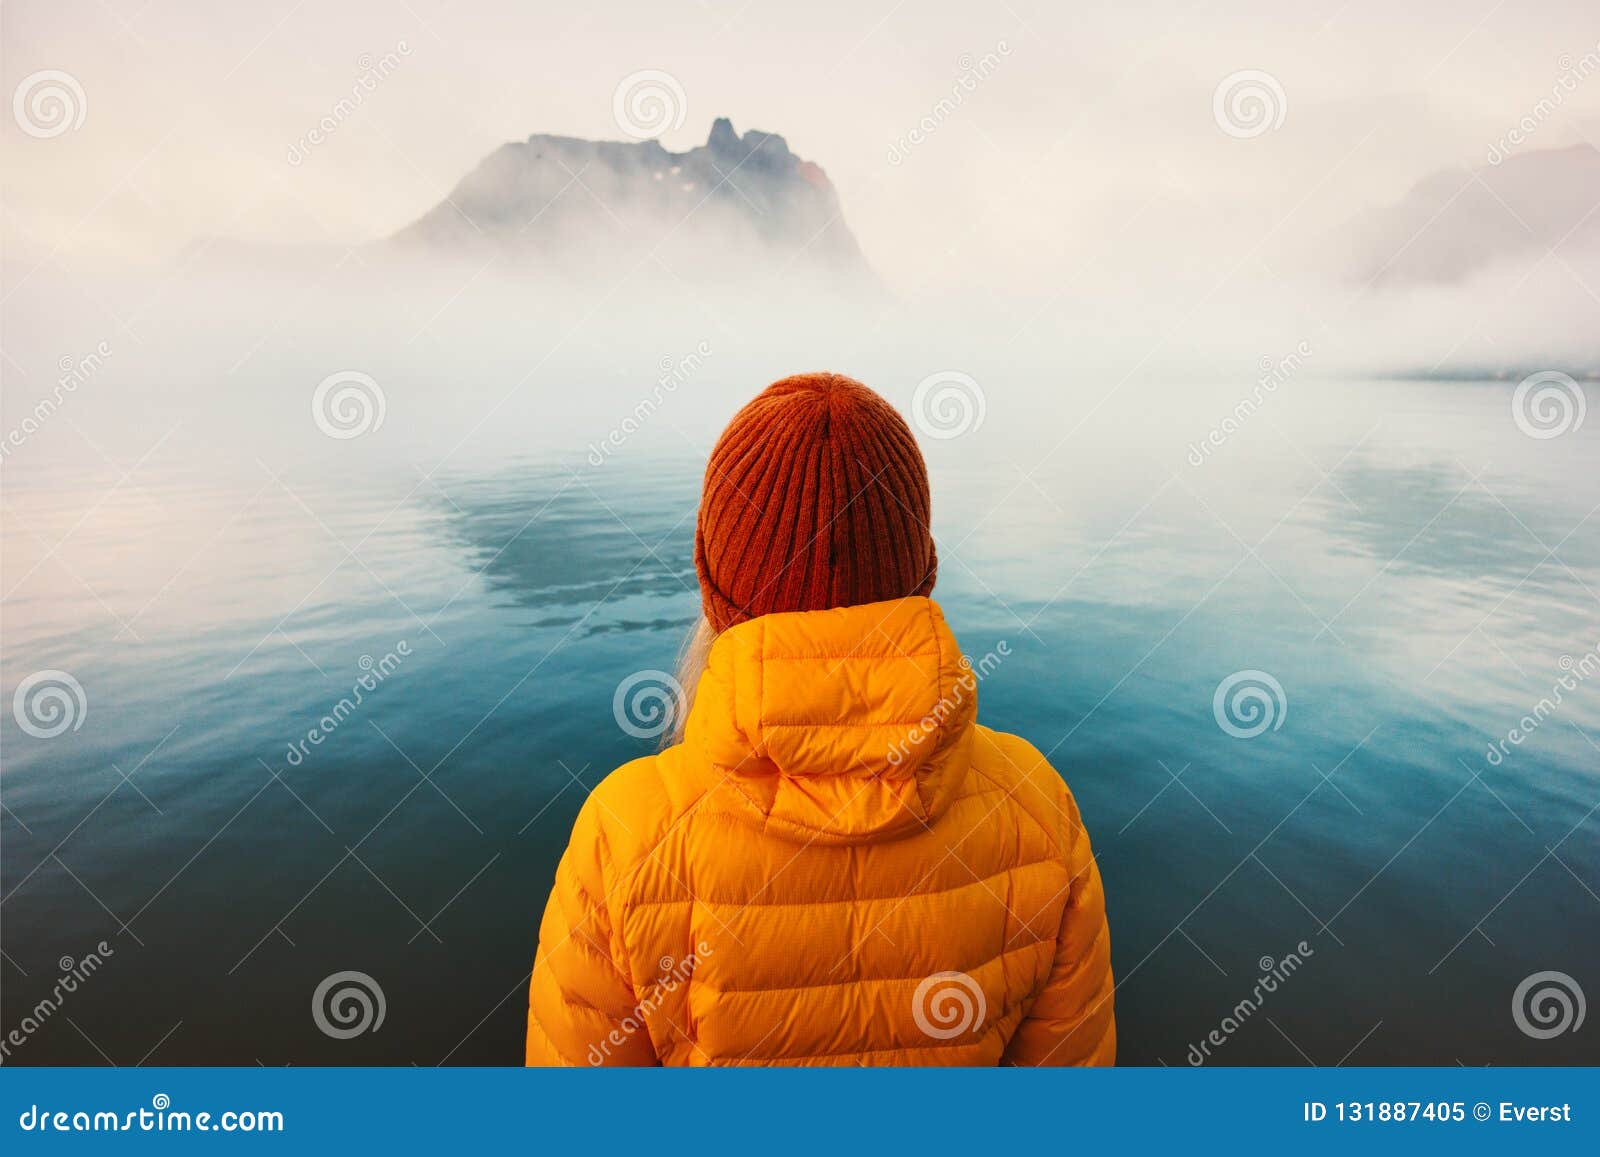 woman alone looking at foggy cold sea traveling adventure lifestyle